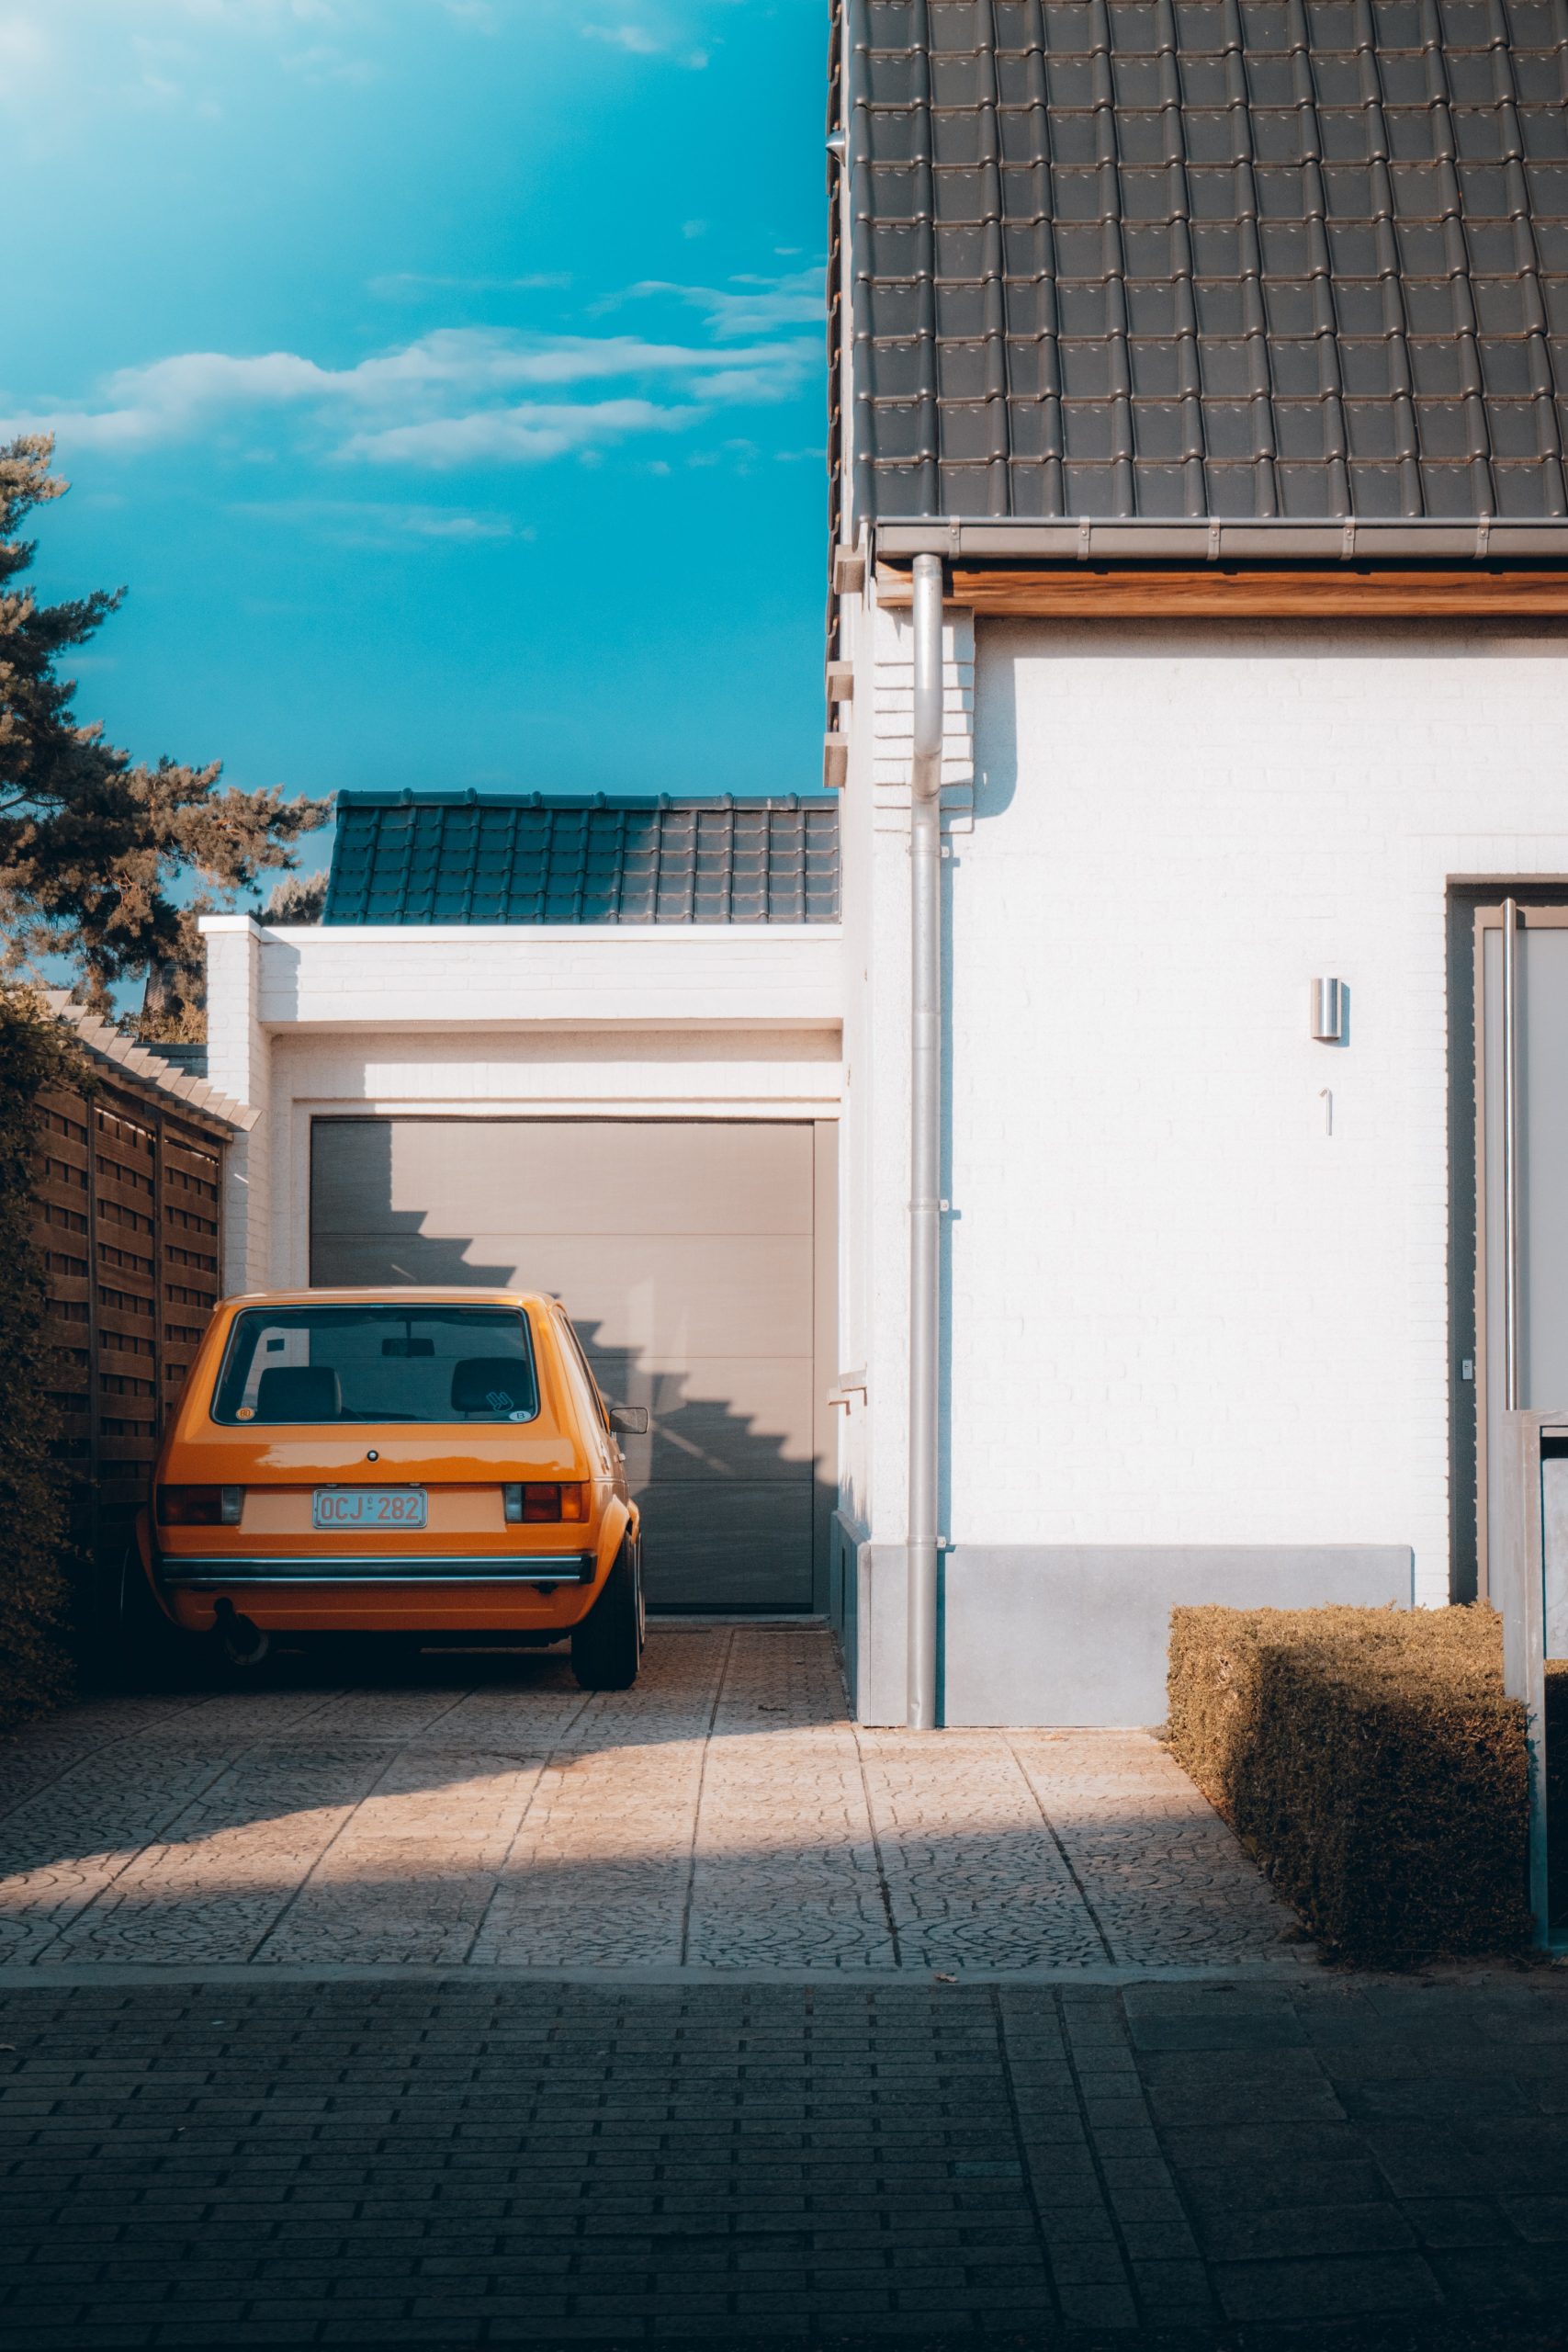 Detached Garage Options When Your Lot is Small